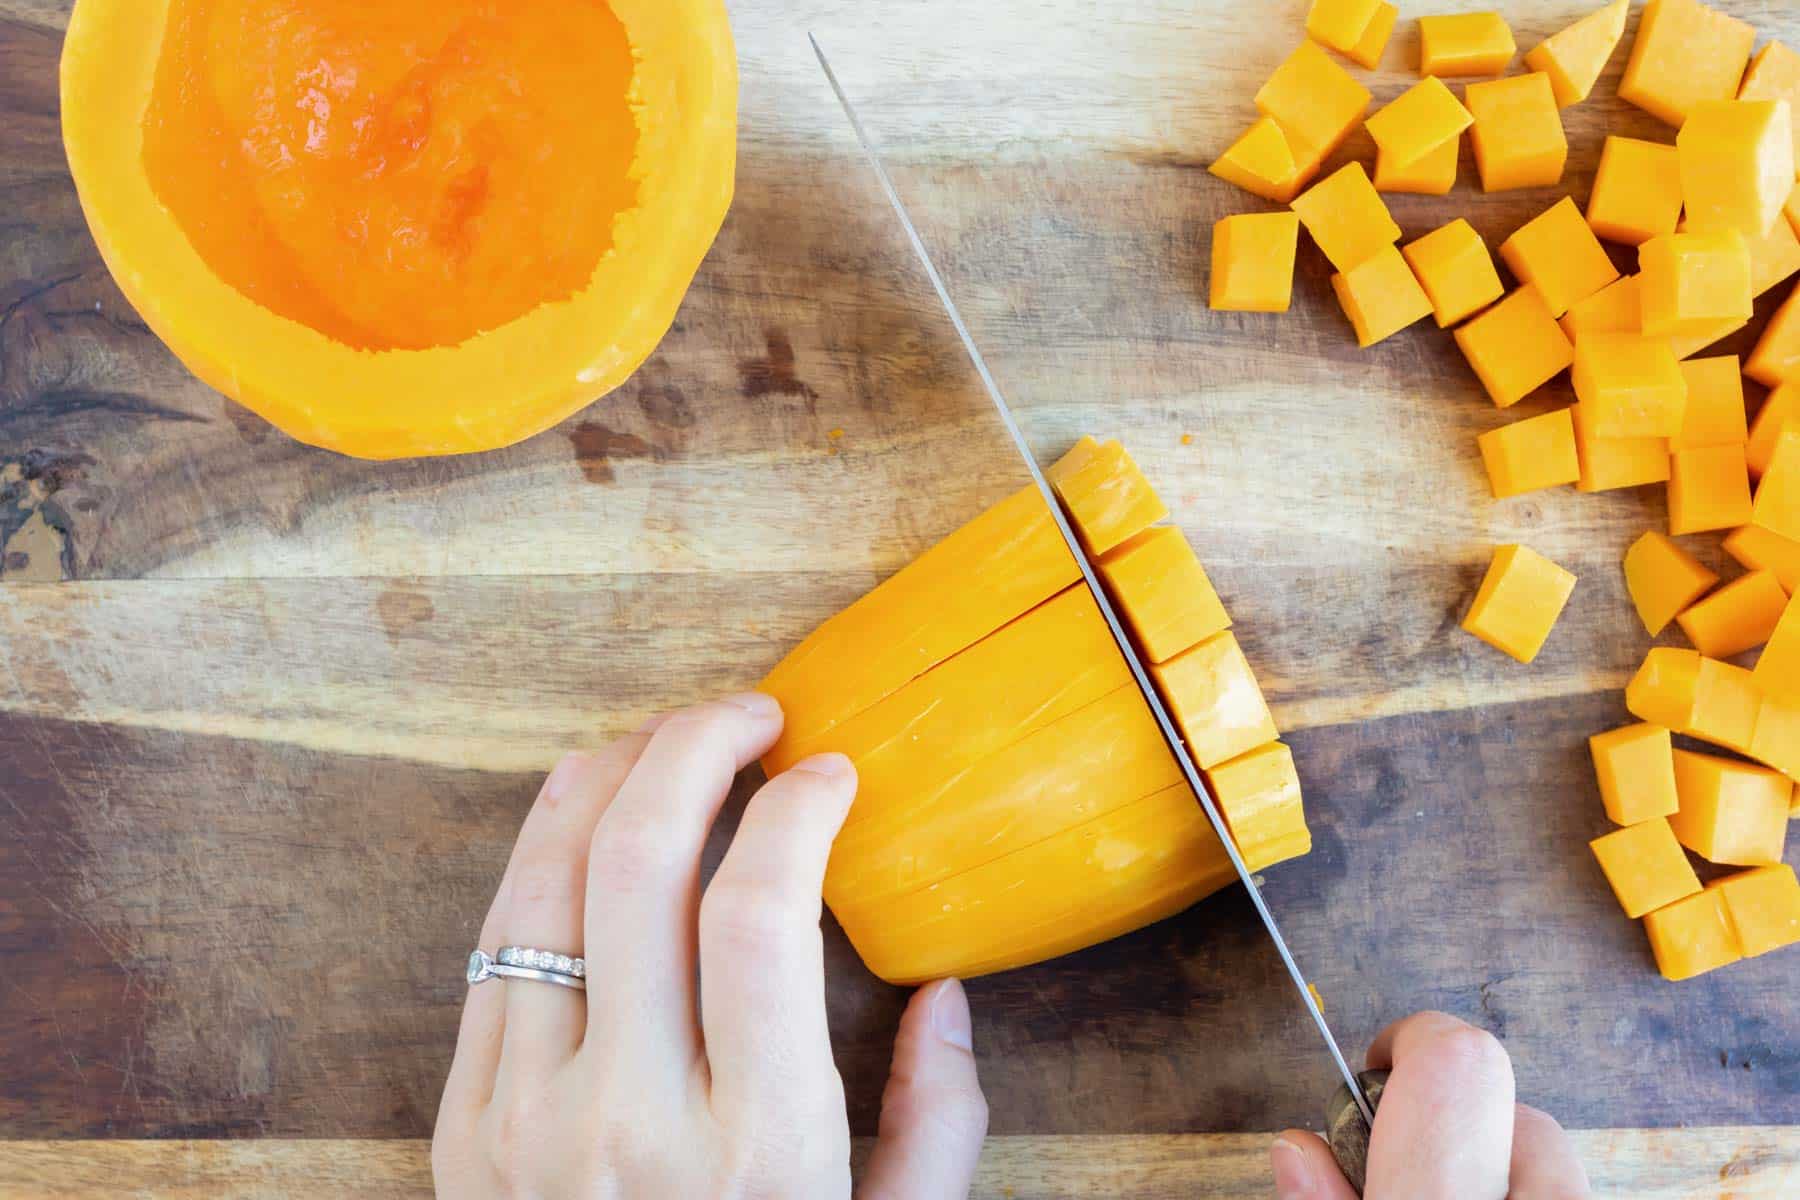 A large knife cuts butternut squash into cubes.